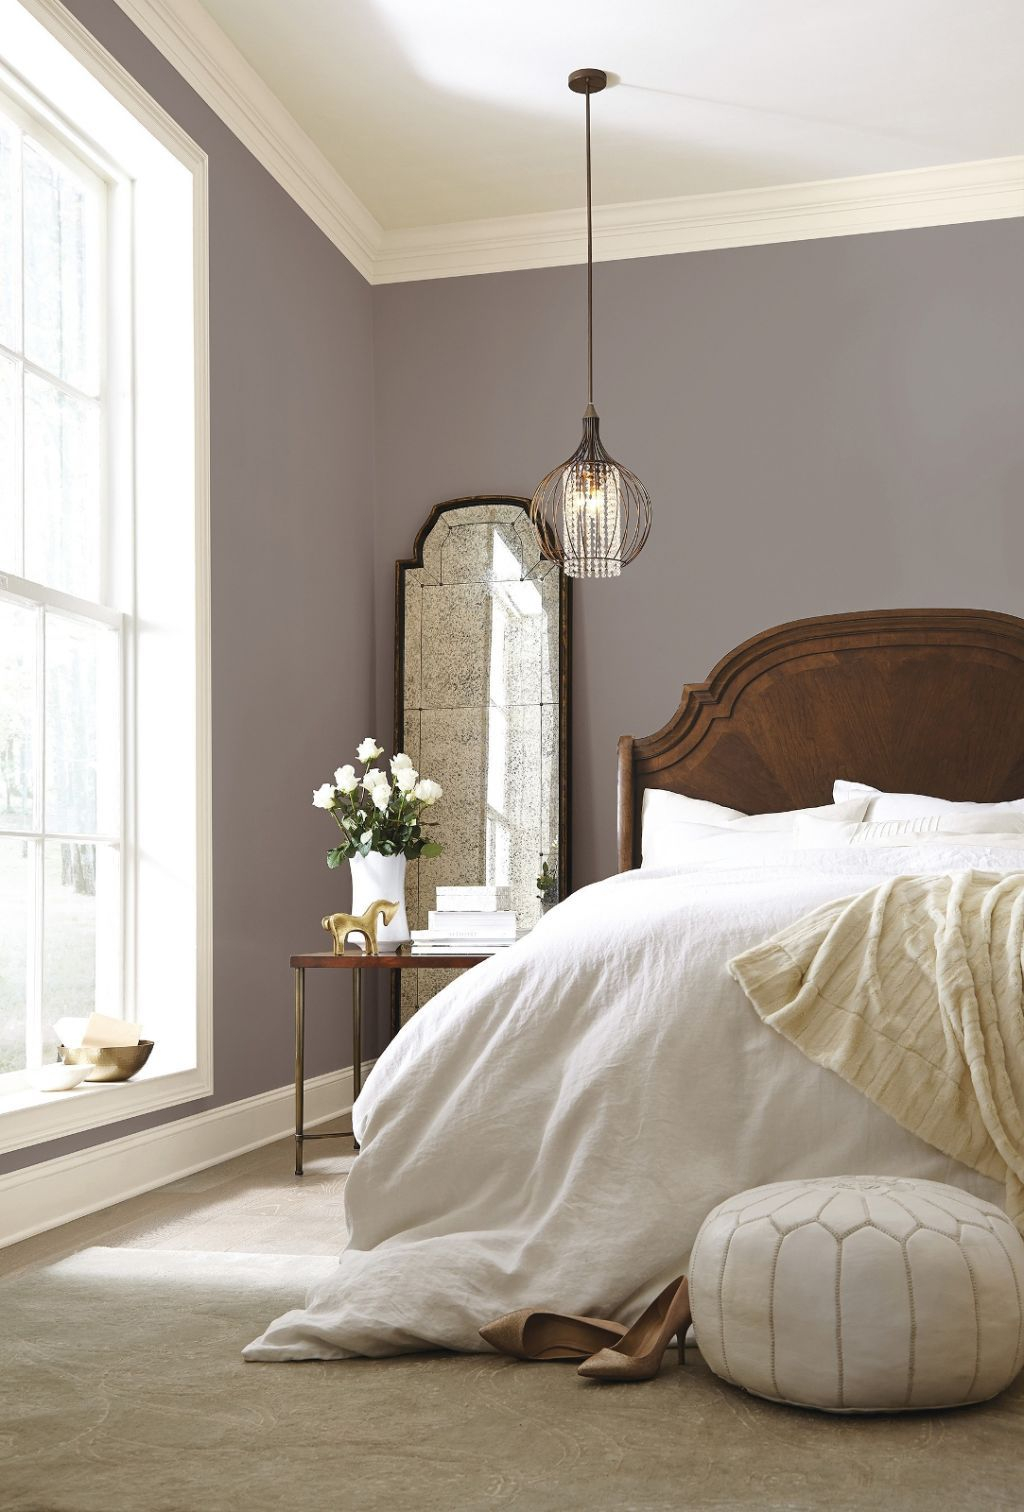 Sherwin Williams Just Announced The Color Of The Year A True Abode with measurements 1024 X 1512